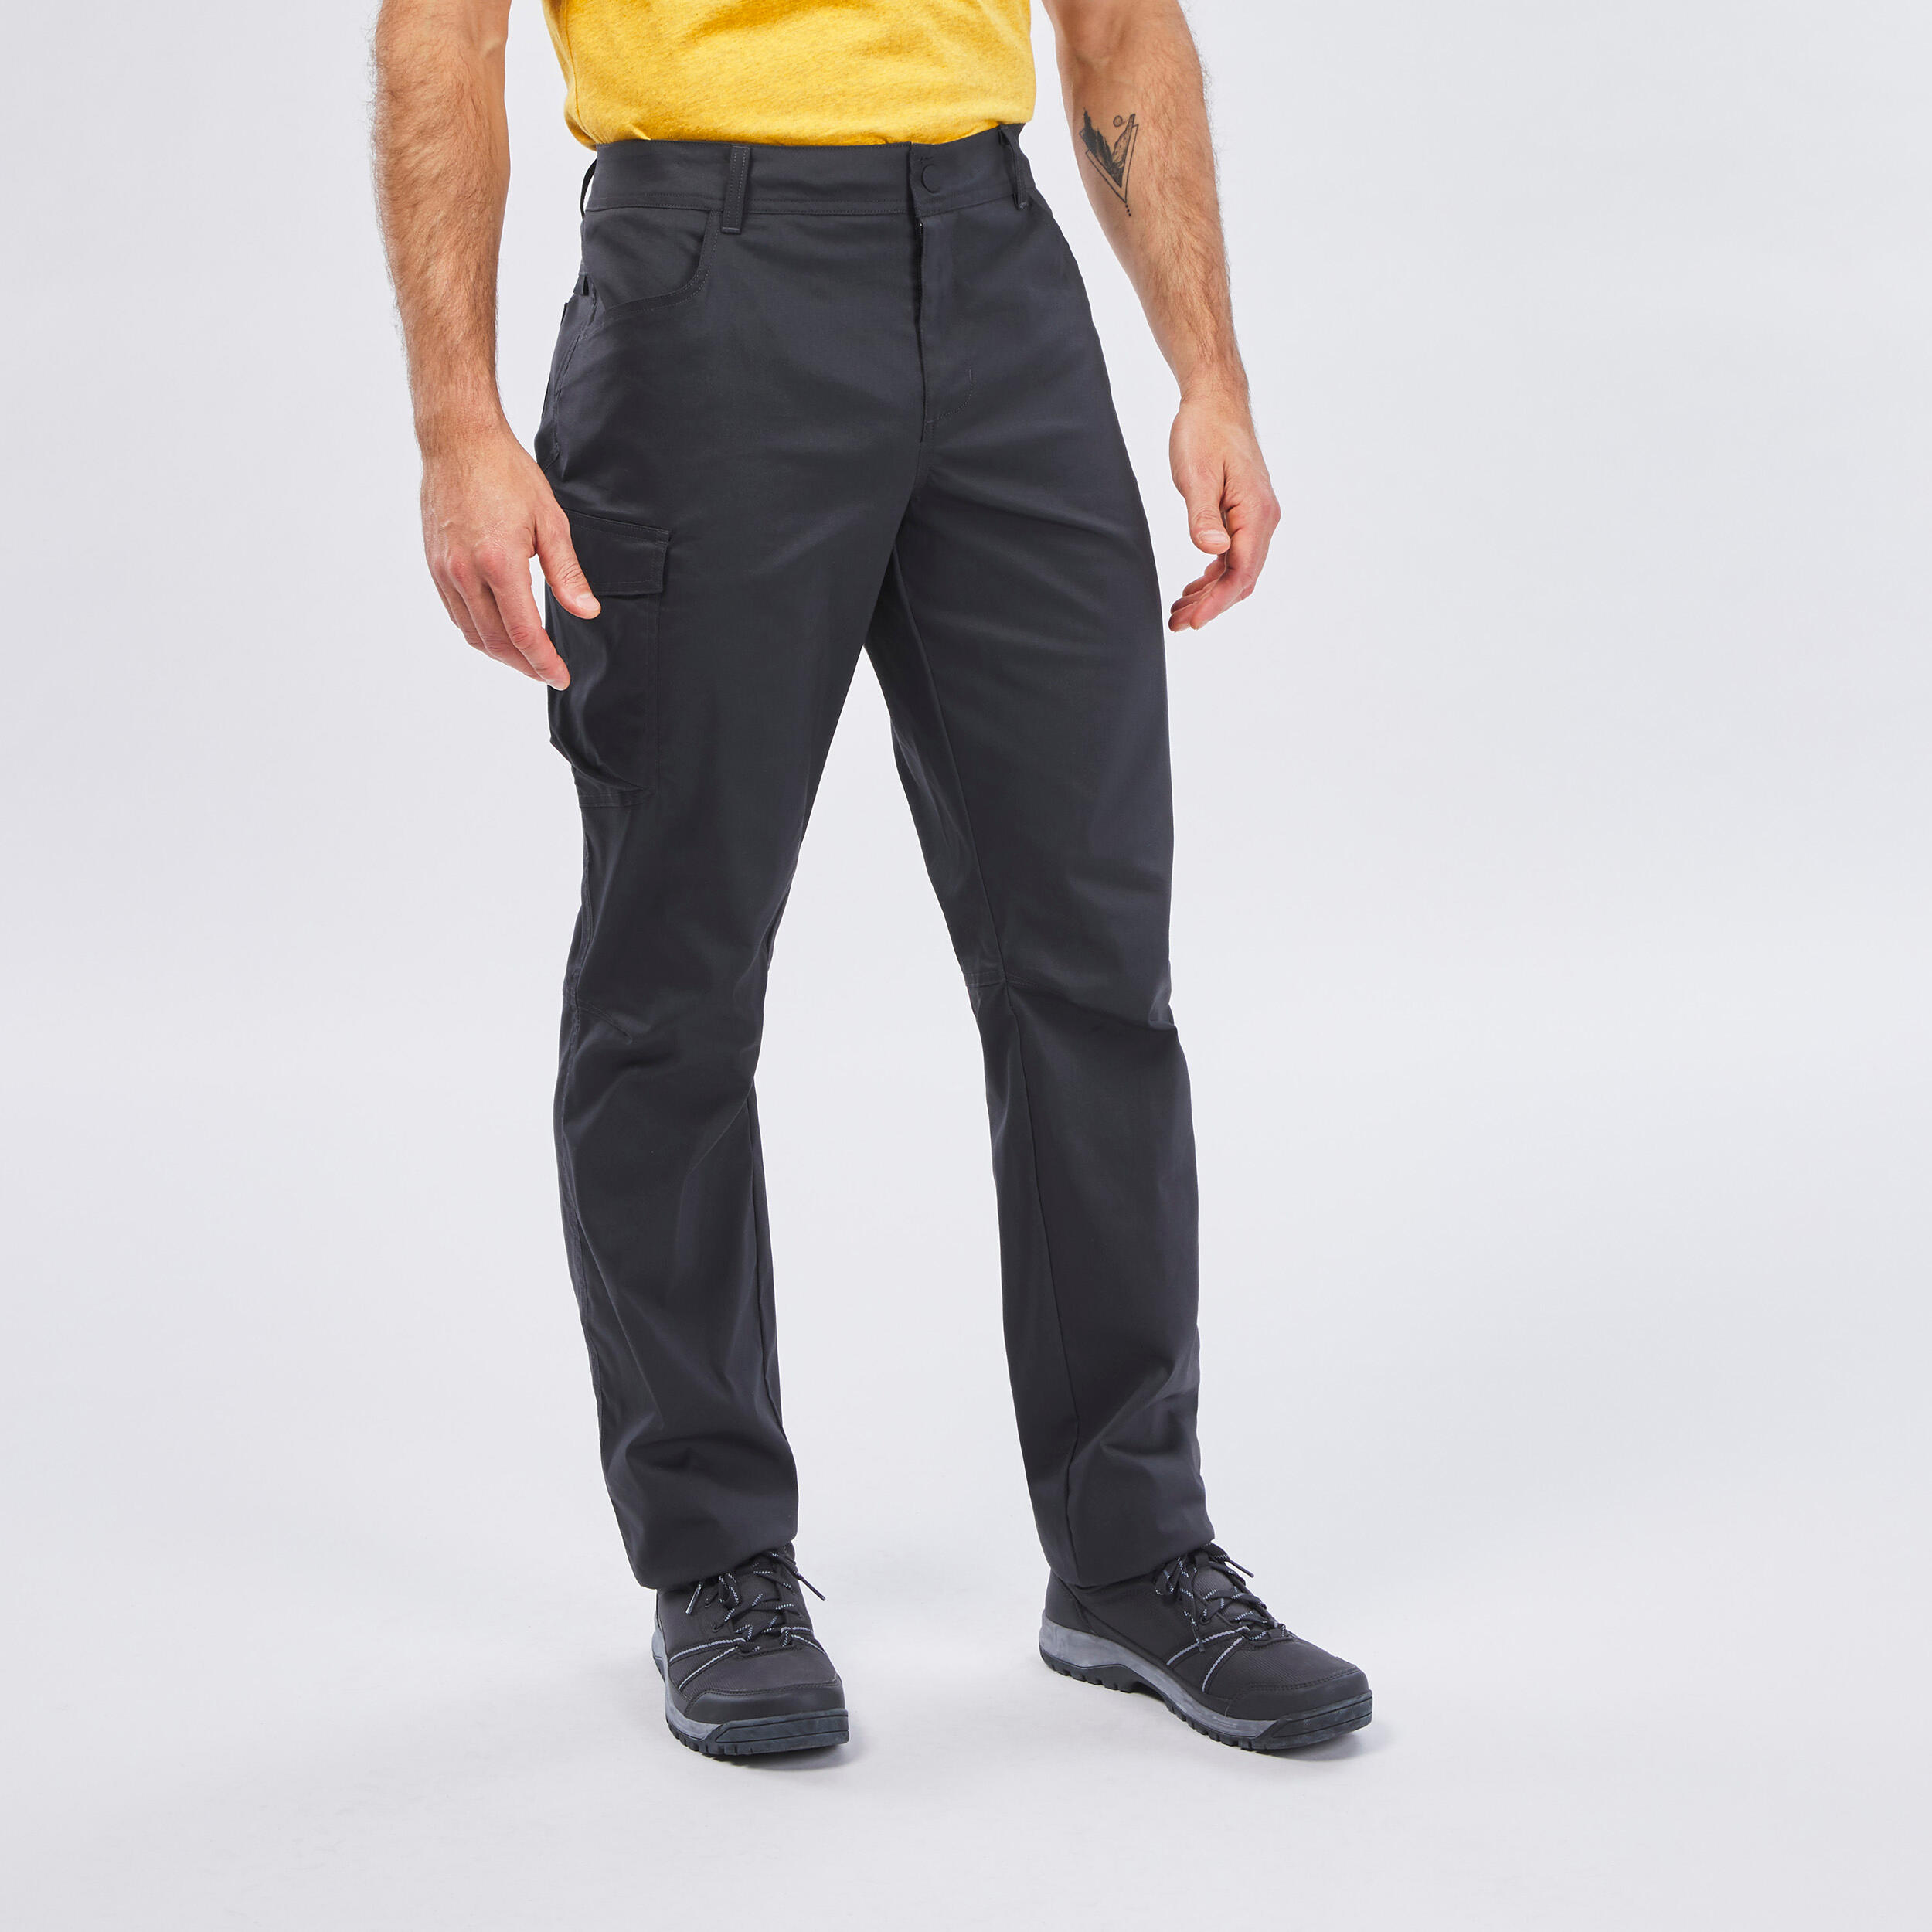 Karrimor Panther Trousers Mens | SportsDirect.com USA